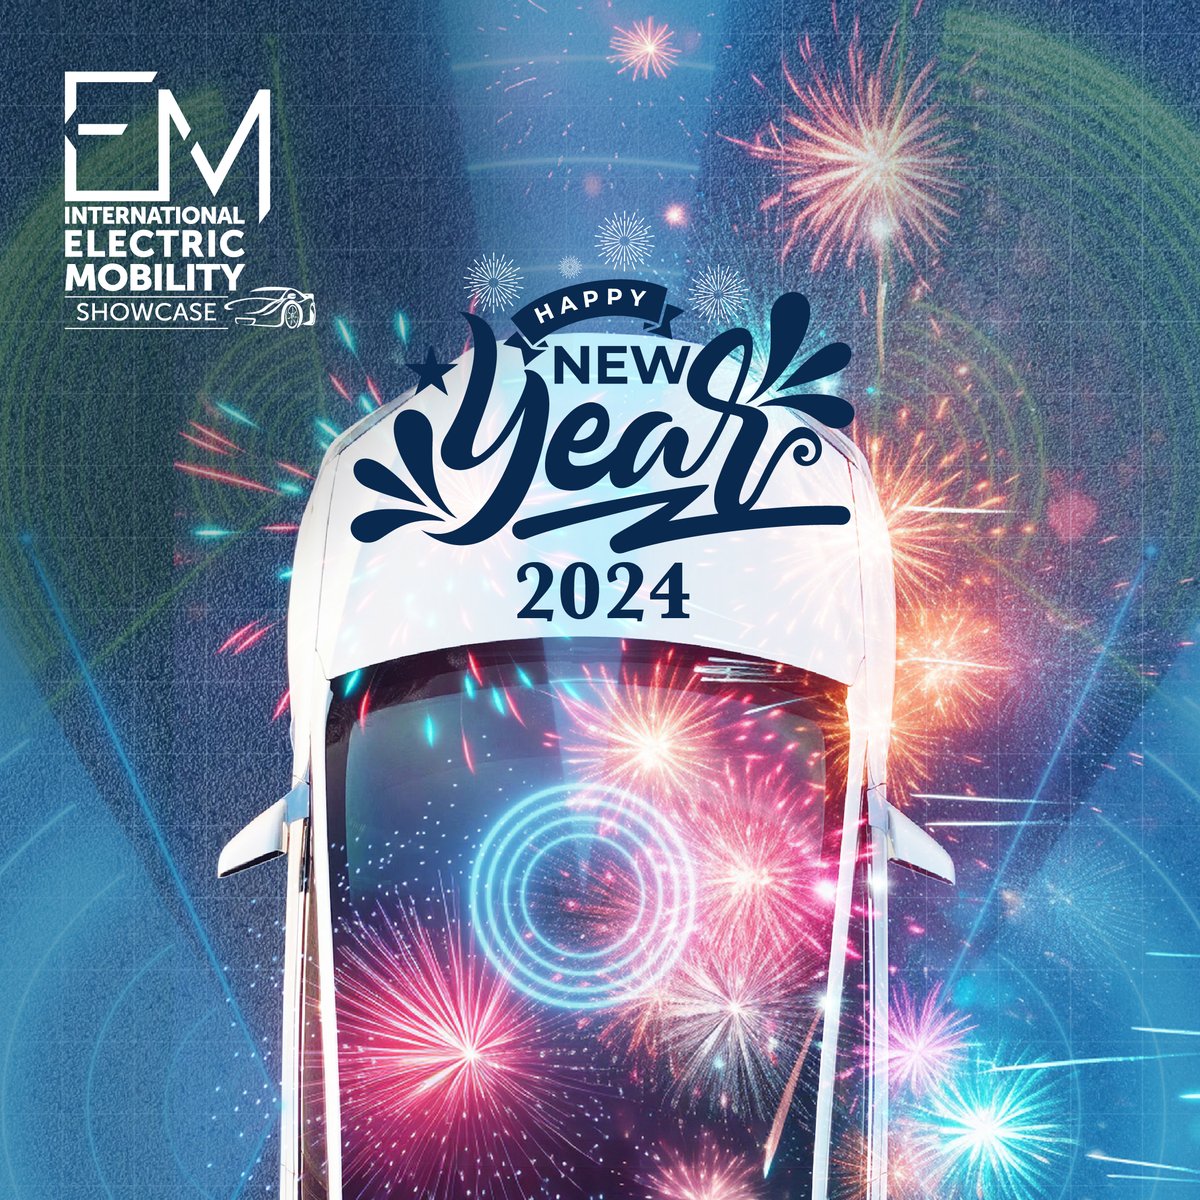 The IEMS team wishes everyone a year ahead filled with boundless joy, immense success, and unparalleled opportunities. 
Happy New Year 2024!

#Newyear2024 #IEMS  #IGEM #MGTC #NRECC #greenenergy #sustainability #ecoproducts #electriccar #hybridcar #electricvehicle #EV